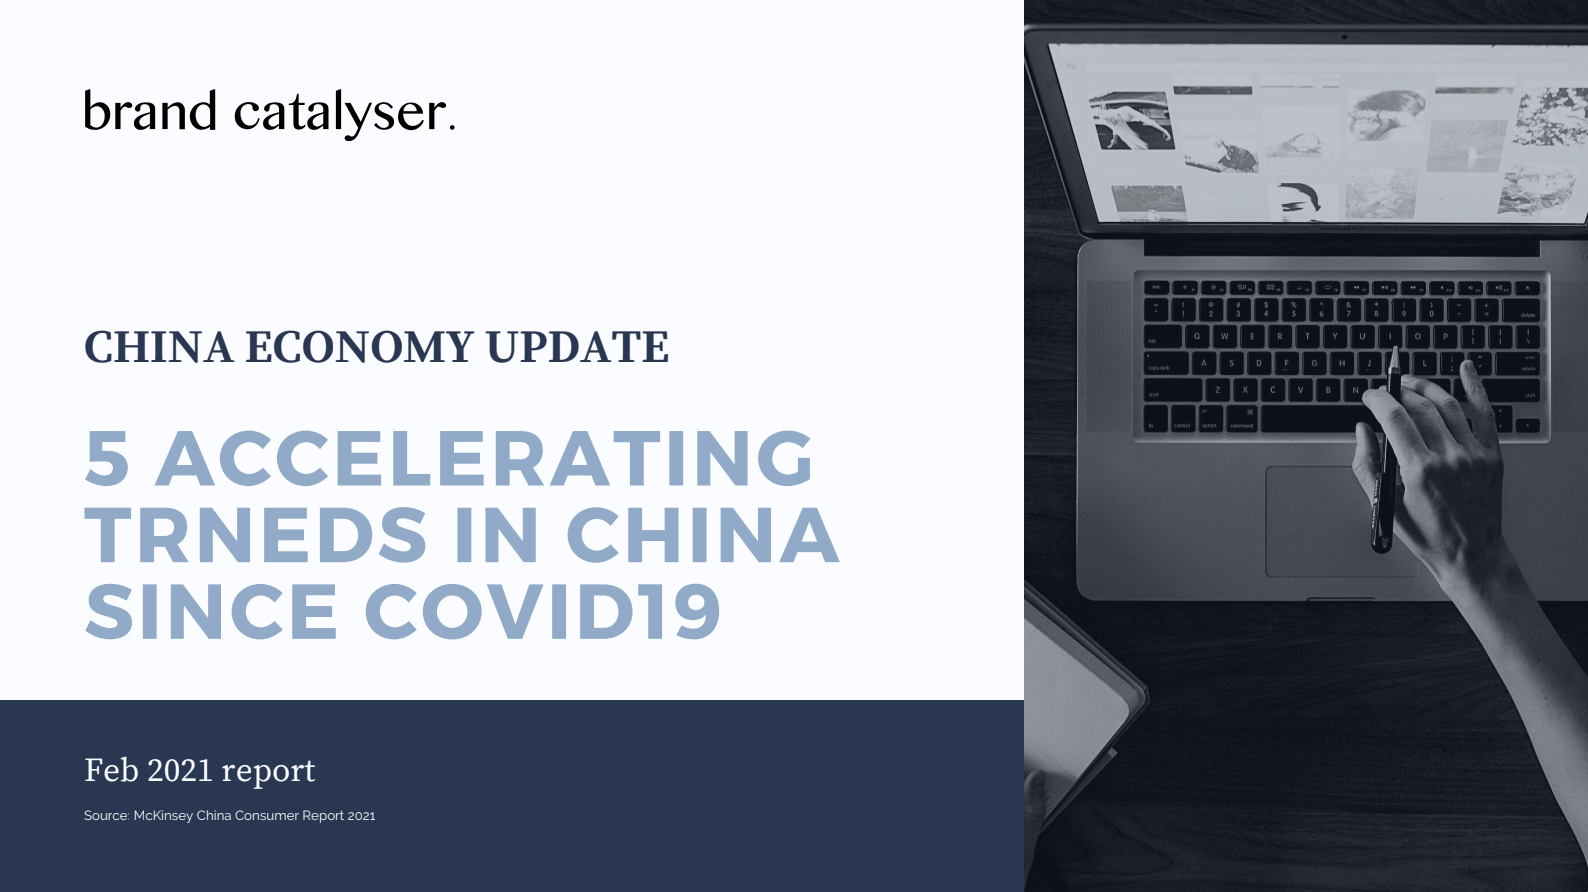 5 Accelerating Trends in China Since Covid19